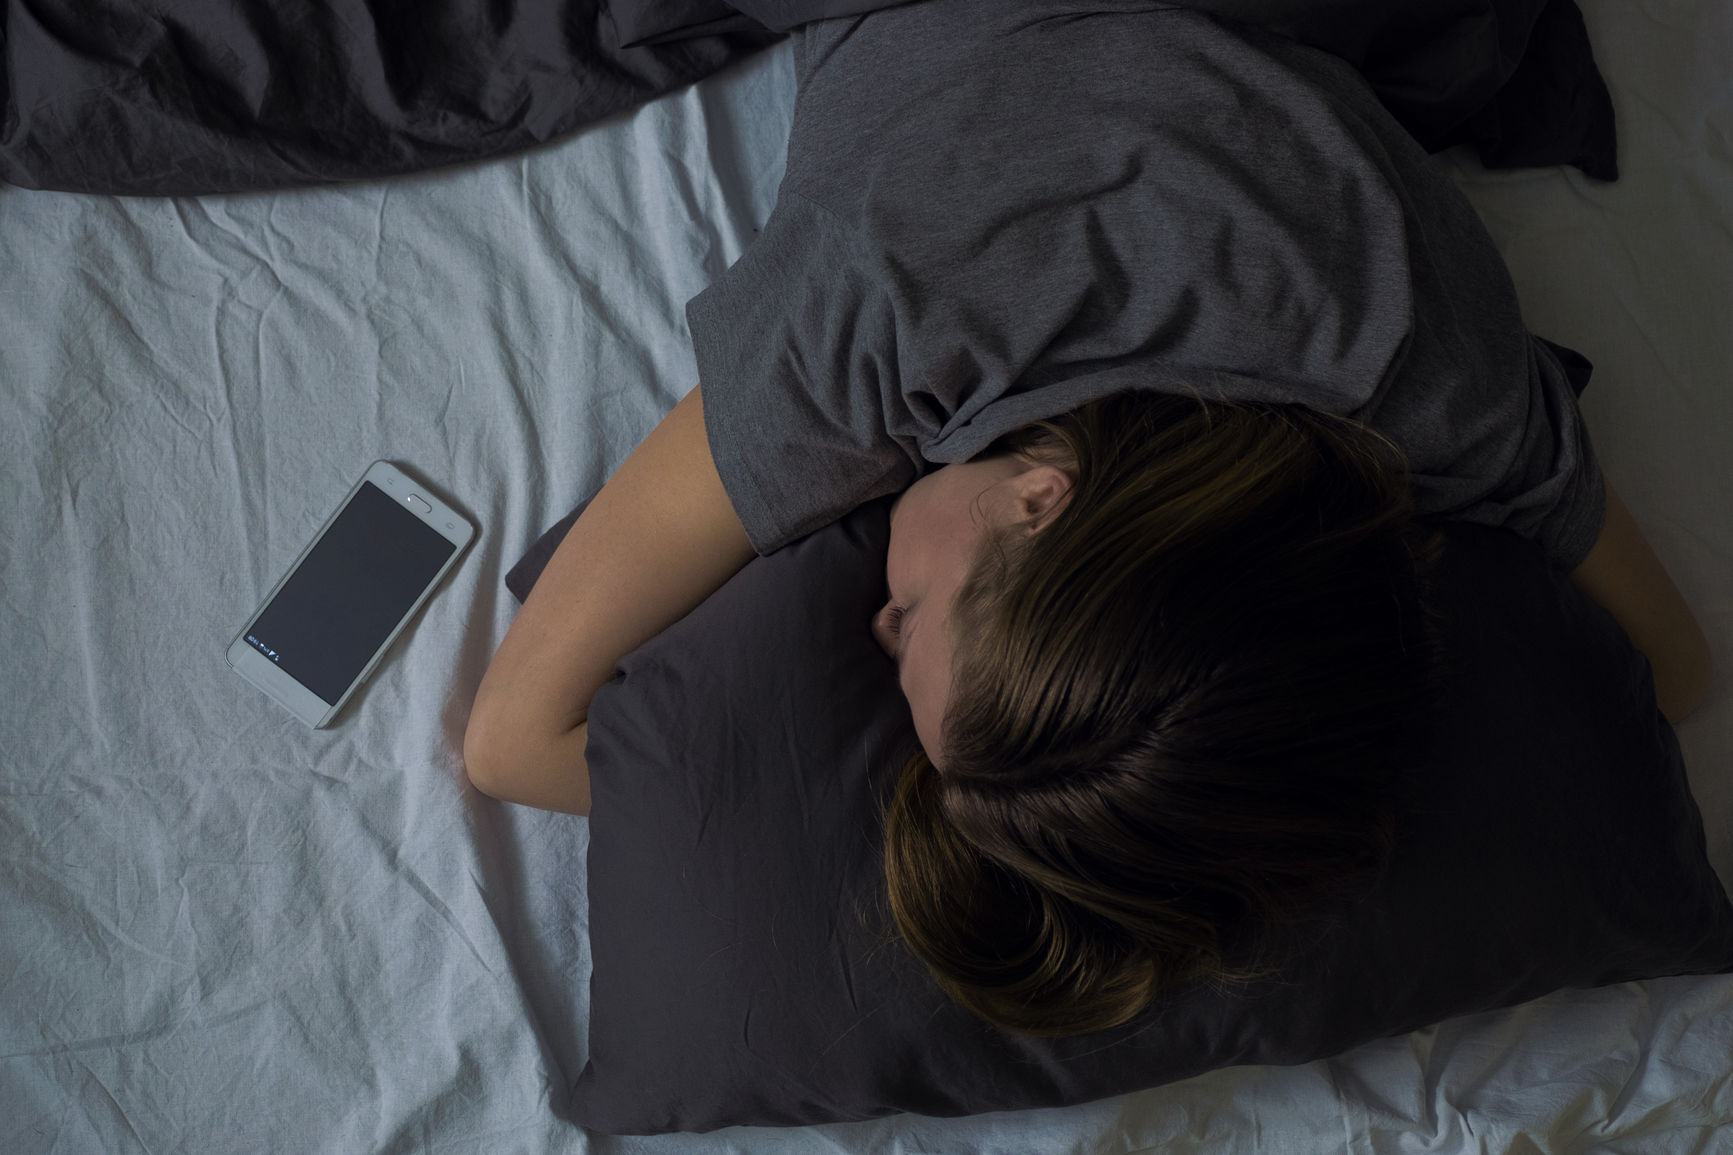 Young woman embracing her pillow and sleeping with enclosed phone. Horizontal indoors shot.